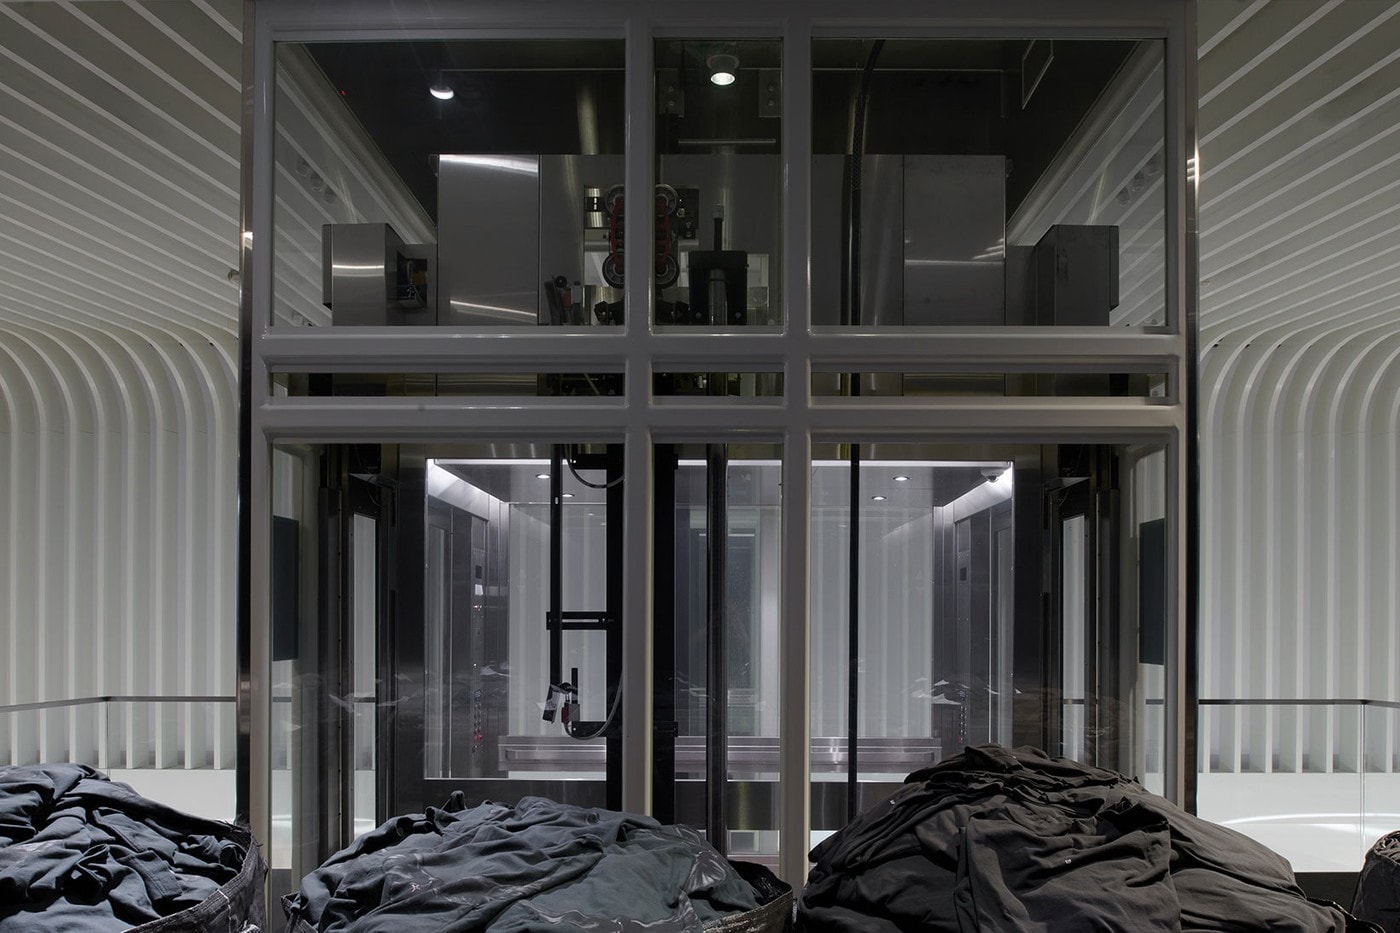 yeezy gap kanye west times square flagship store nyc engineered by balenciaga 